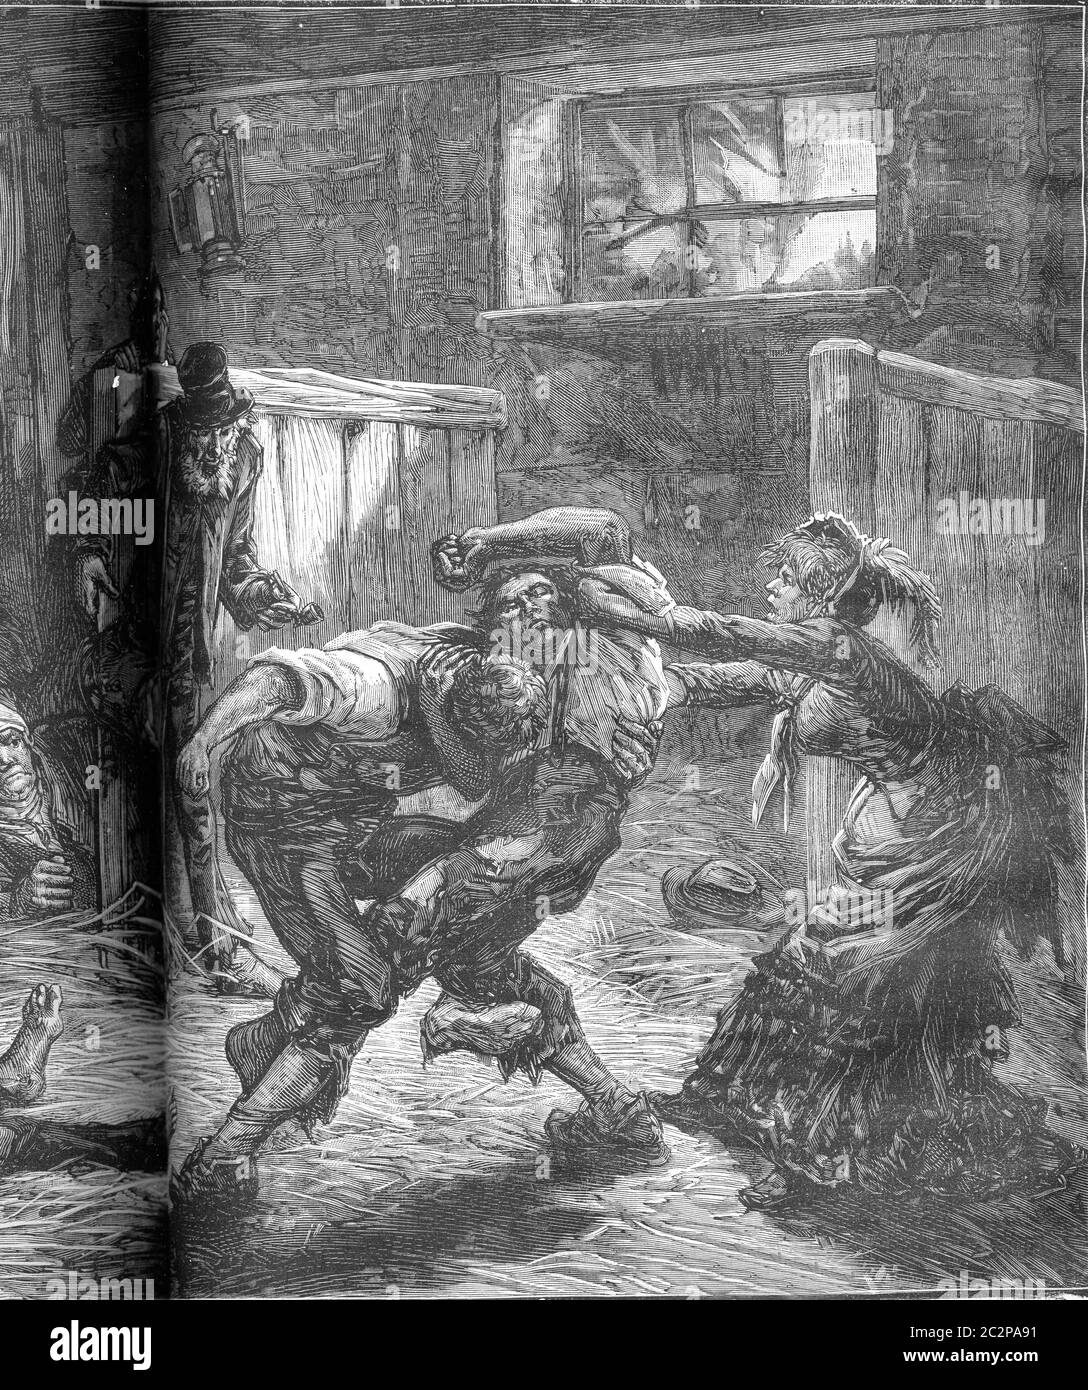 A brawl in a flophouse in London. The woman and her companions called for help. From Travel Diaries, vintage engraving, 1884-85. Stock Photo